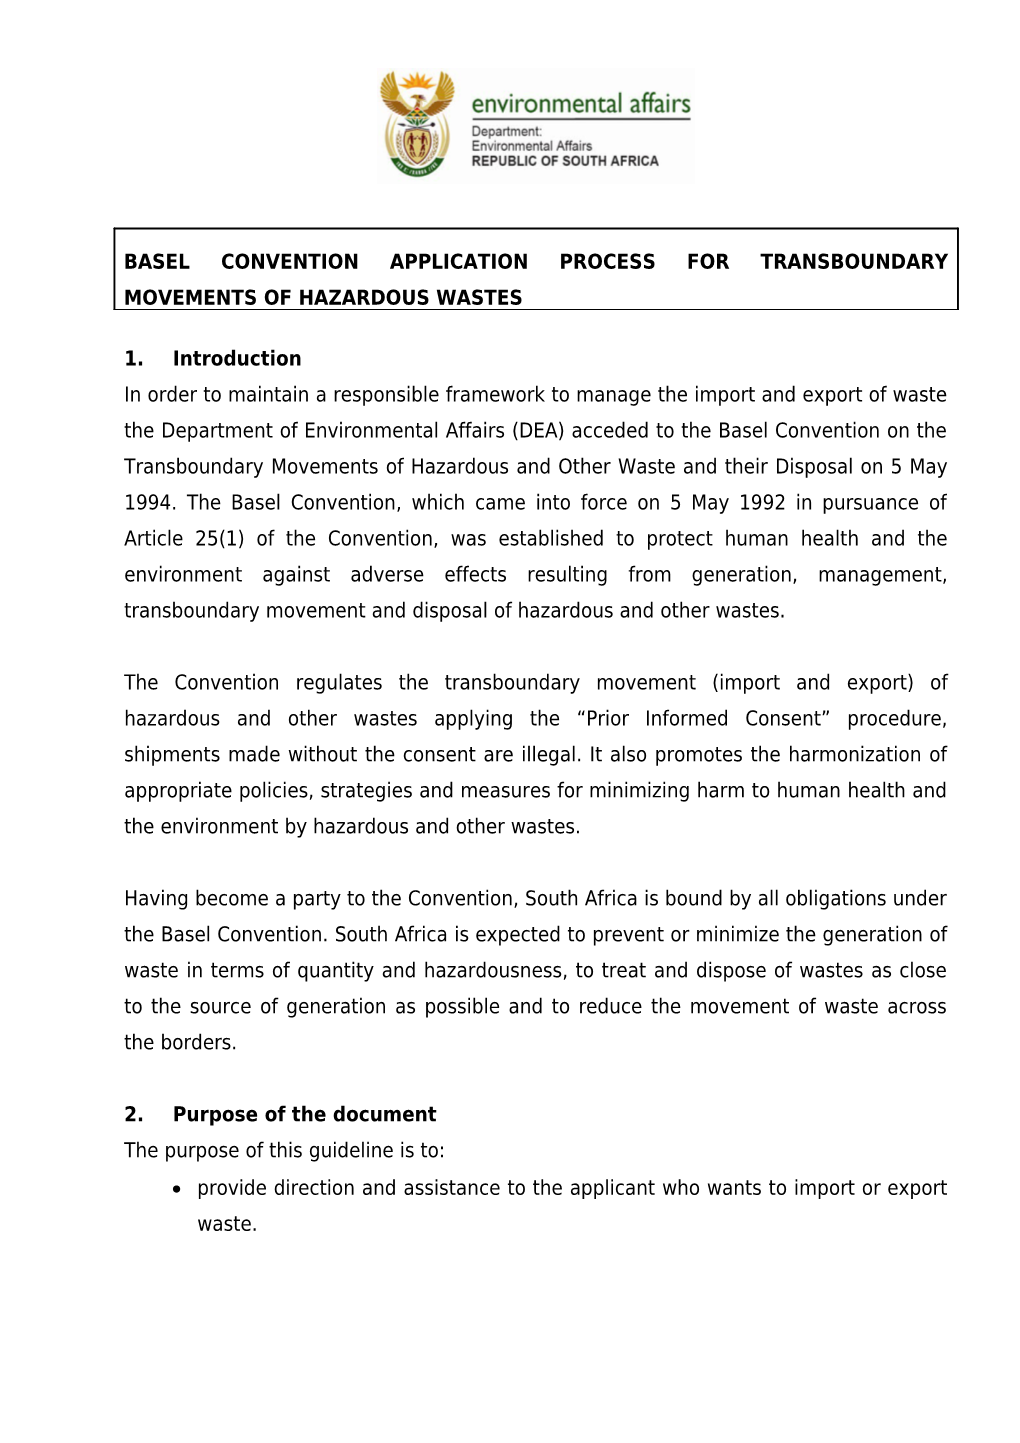 Basel Convention Application Process for Transboundary Movements of Hazardous Wastes